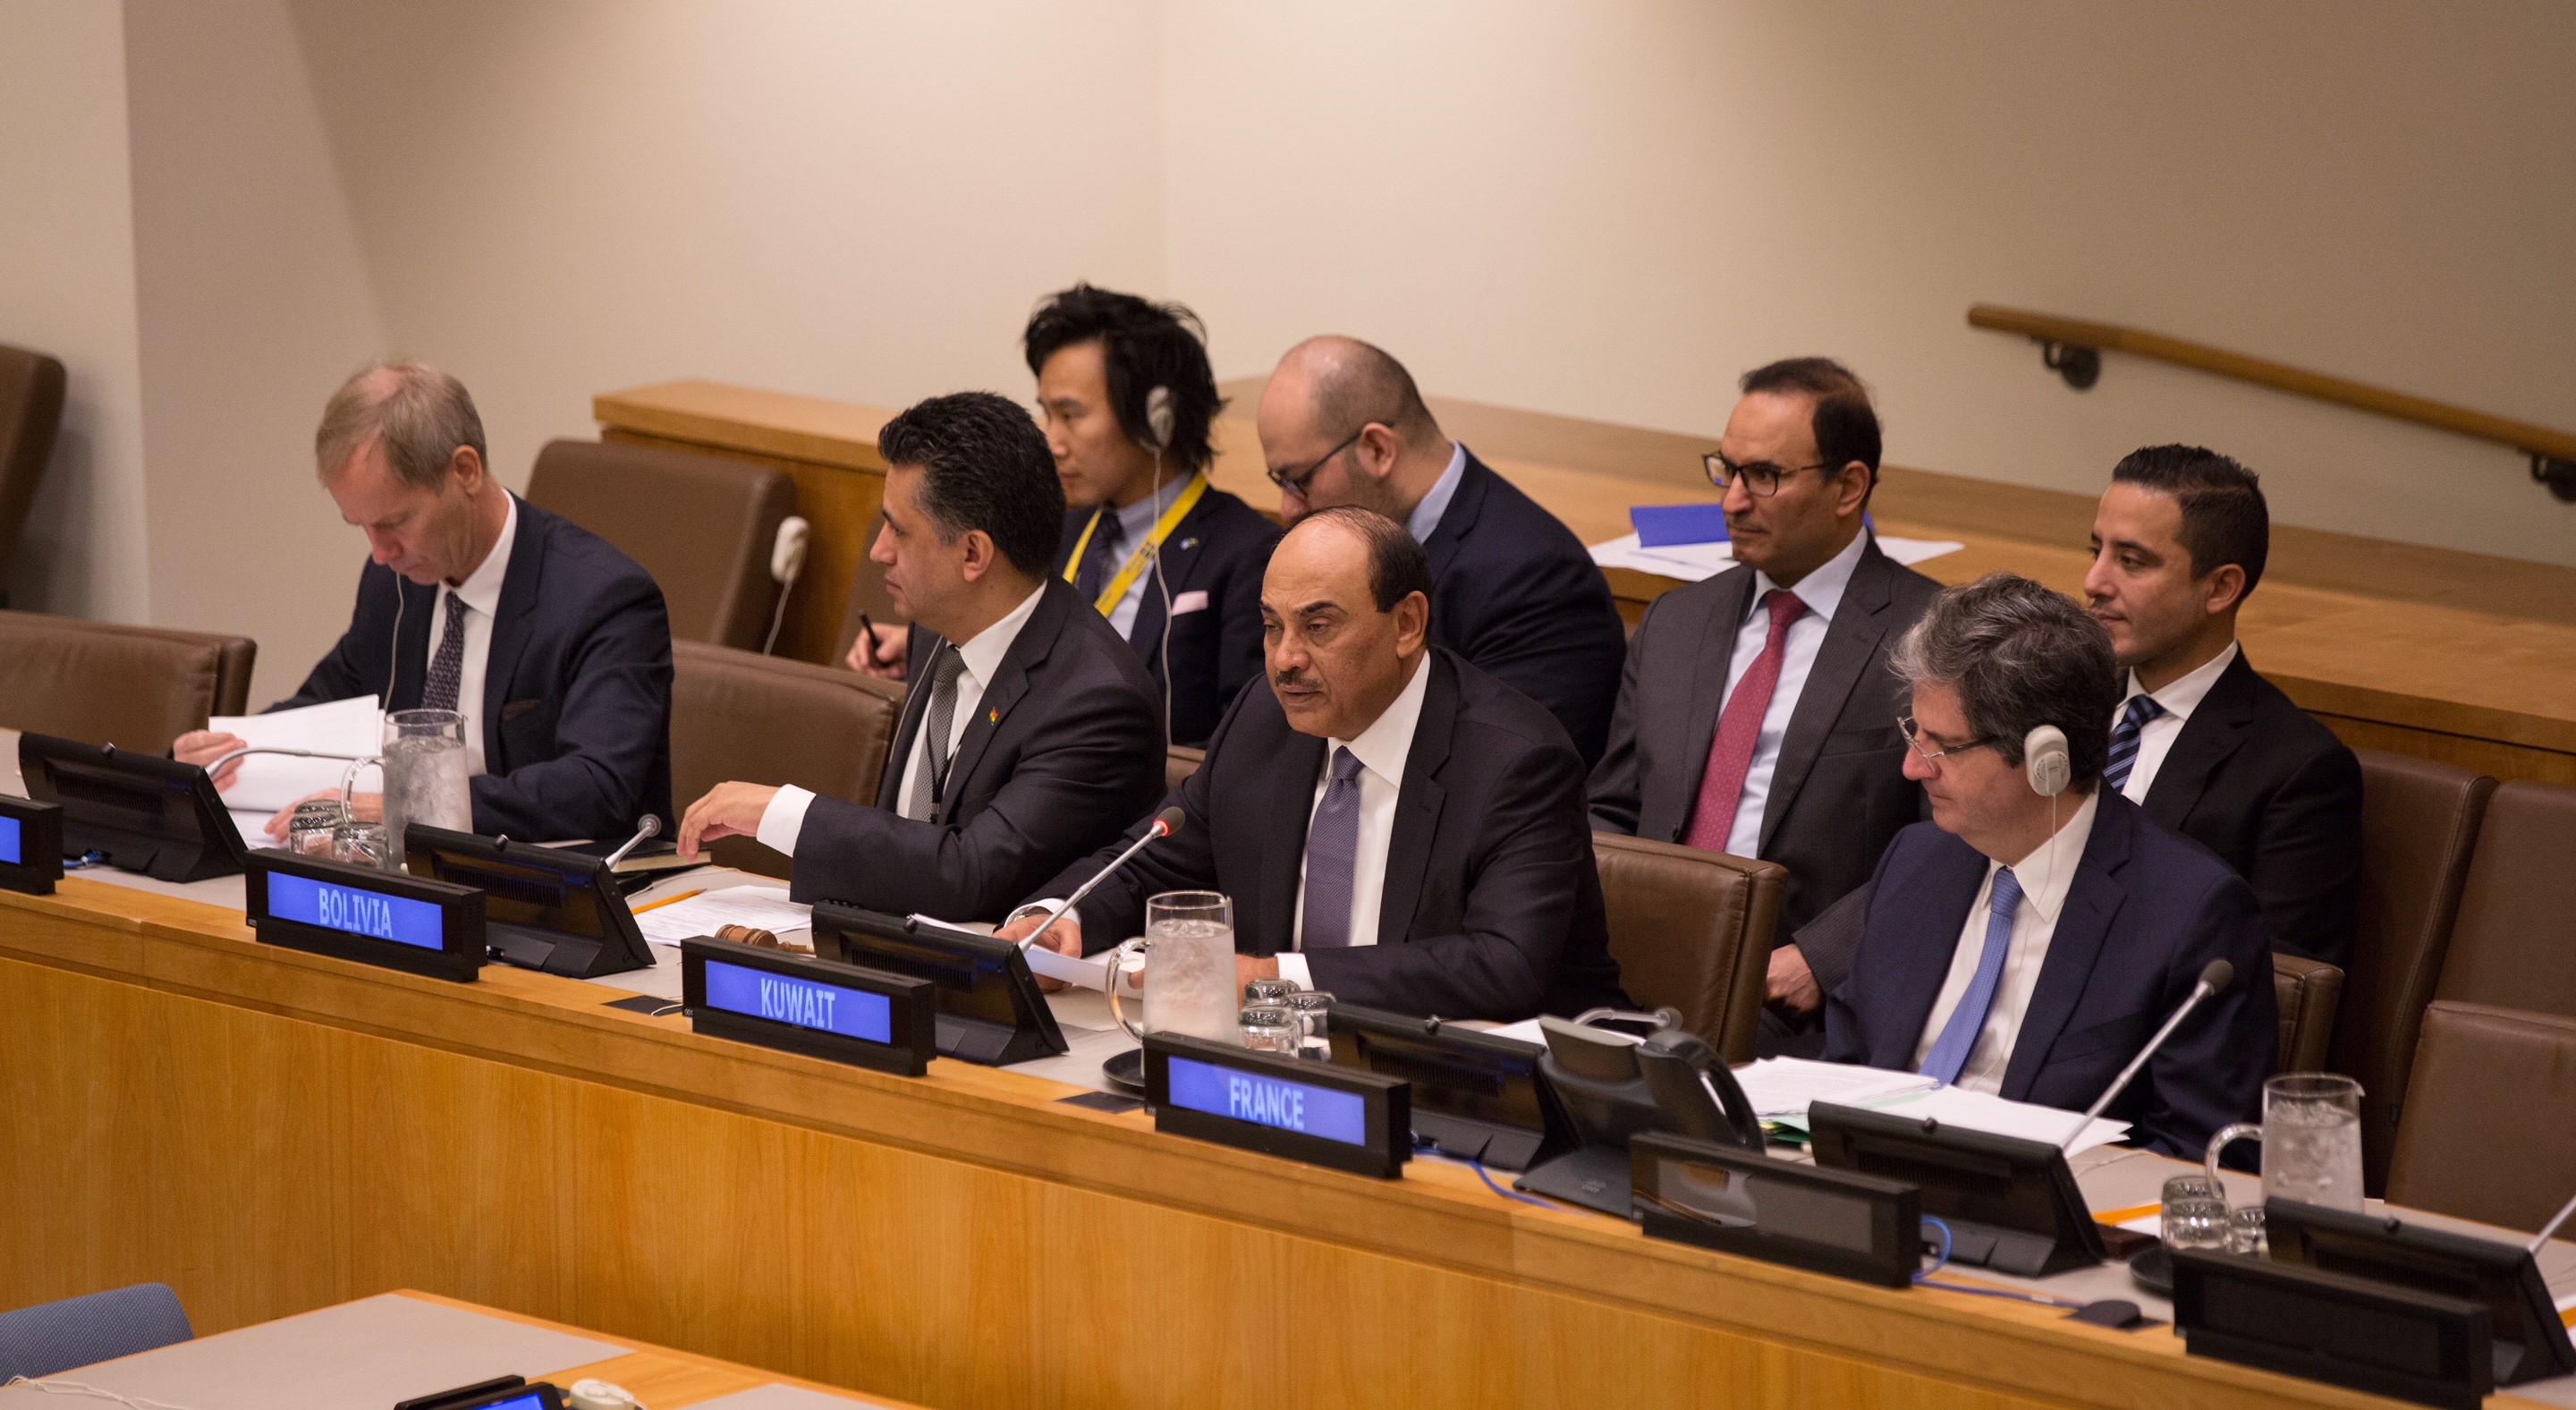 Deputy Prime Minister and Minister of Foreign Affairs Sheikh Sabah Al-Khaled Al-Hamad Al-Sabah chairs  UNSC meeting on Palestinian cause